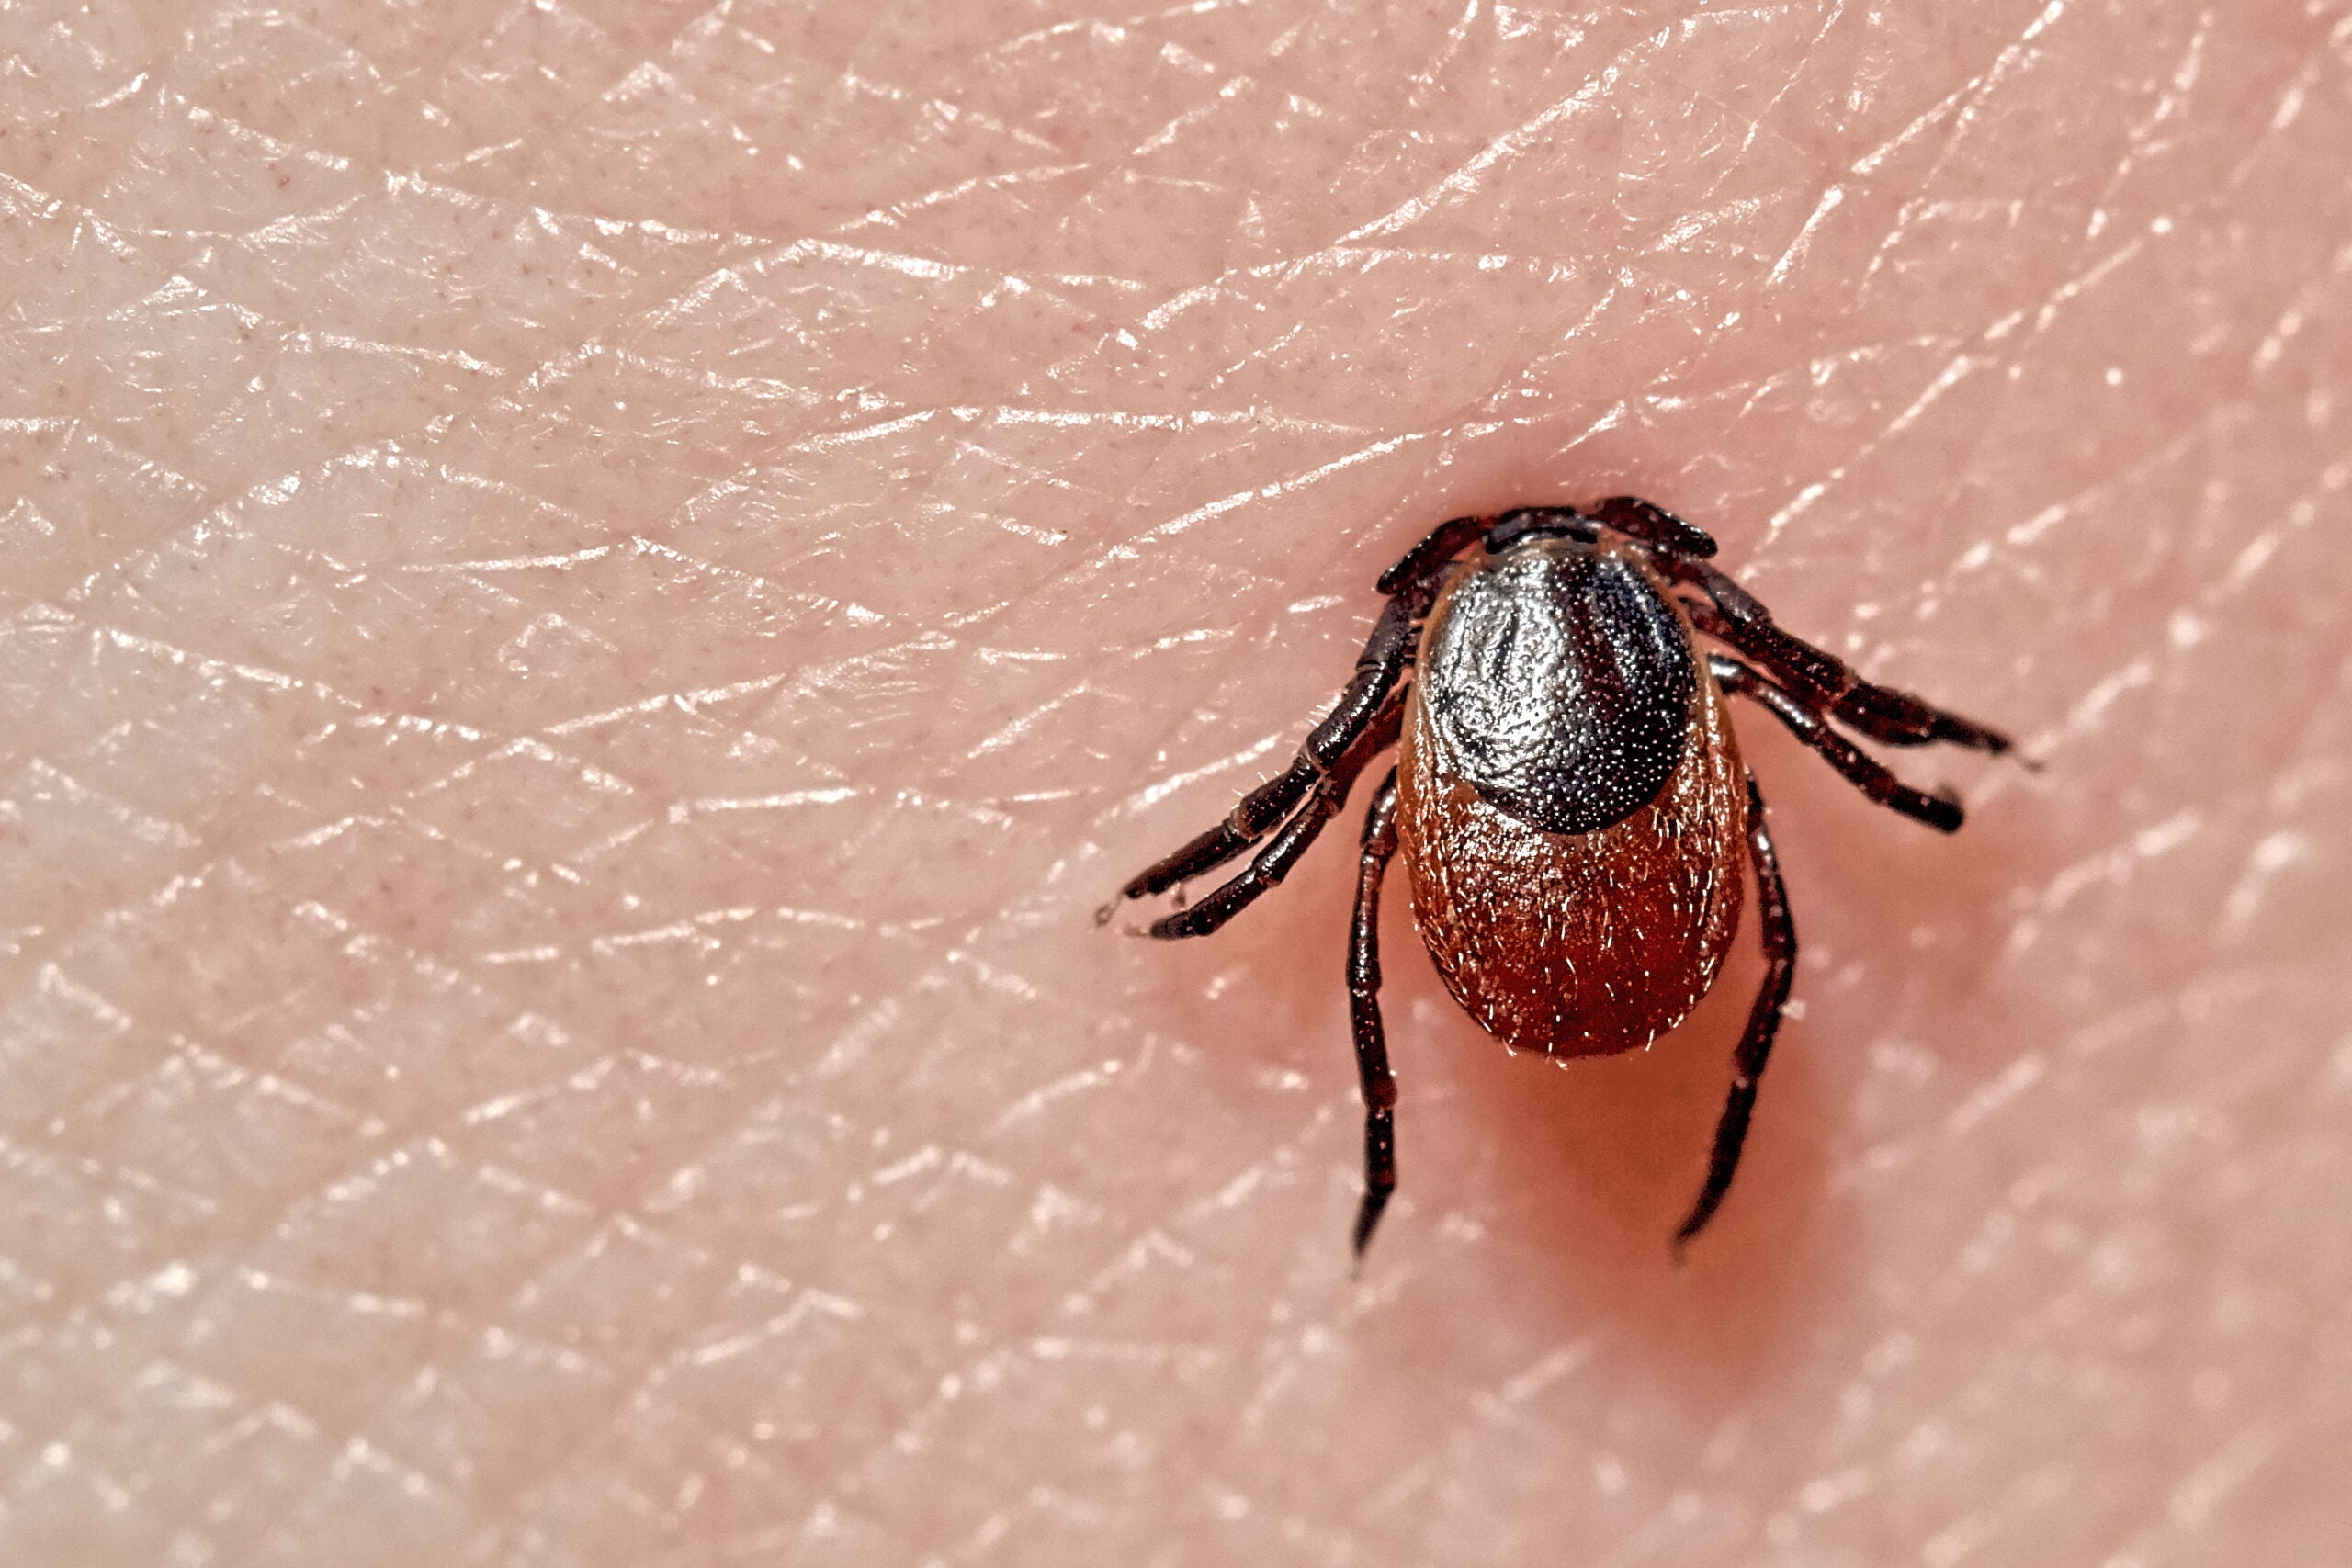 photo of embedded tick